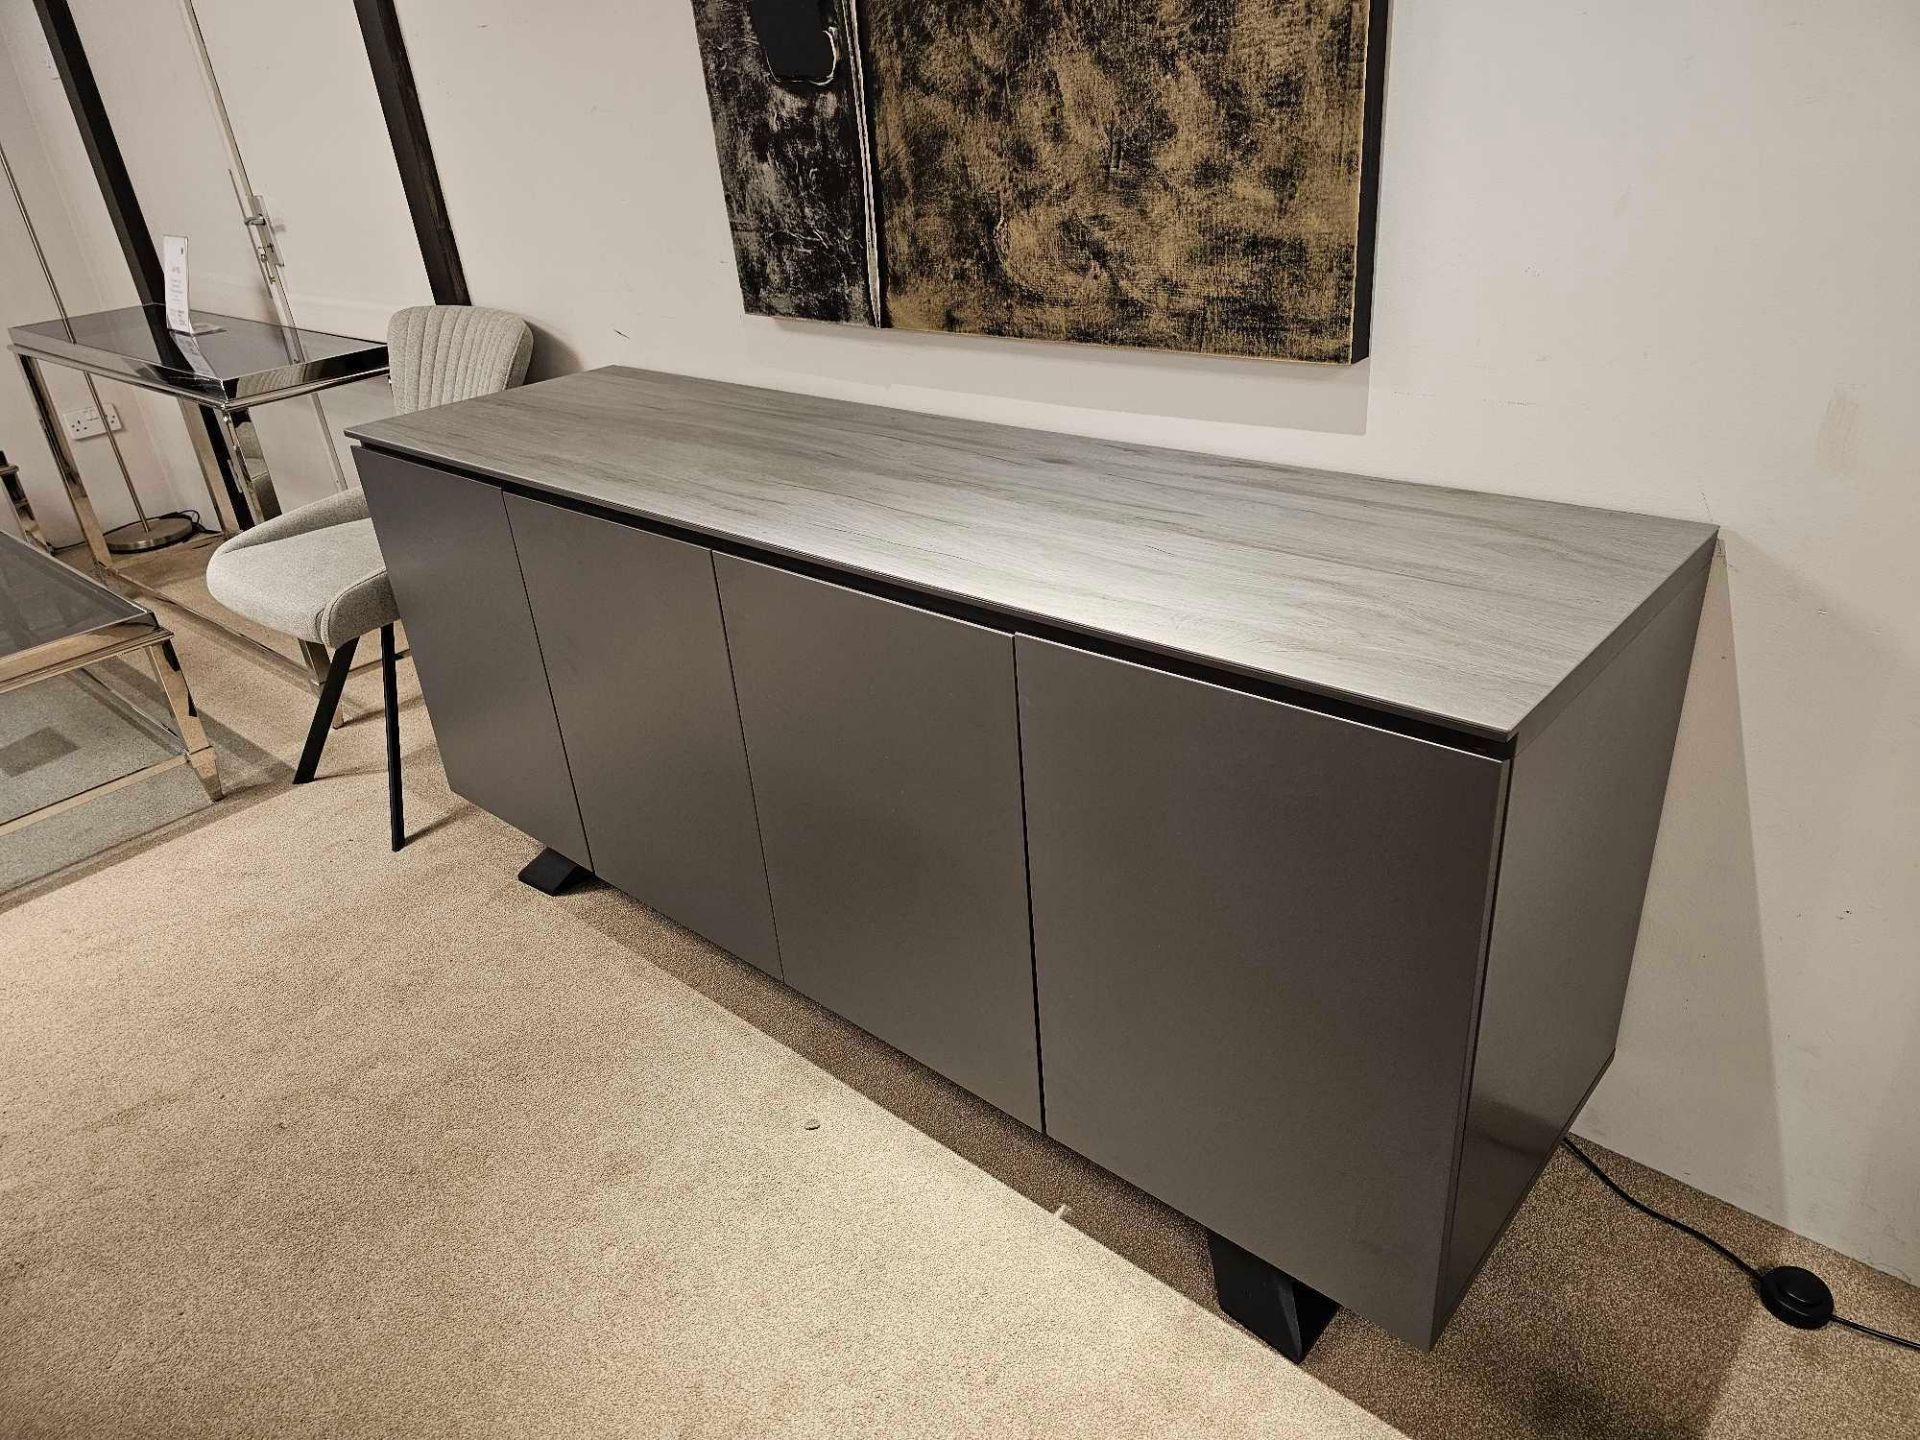 Spartan Sideboard by Kesterport The Spartan Four Door Sideboard provides is striking as a stand - Image 8 of 12